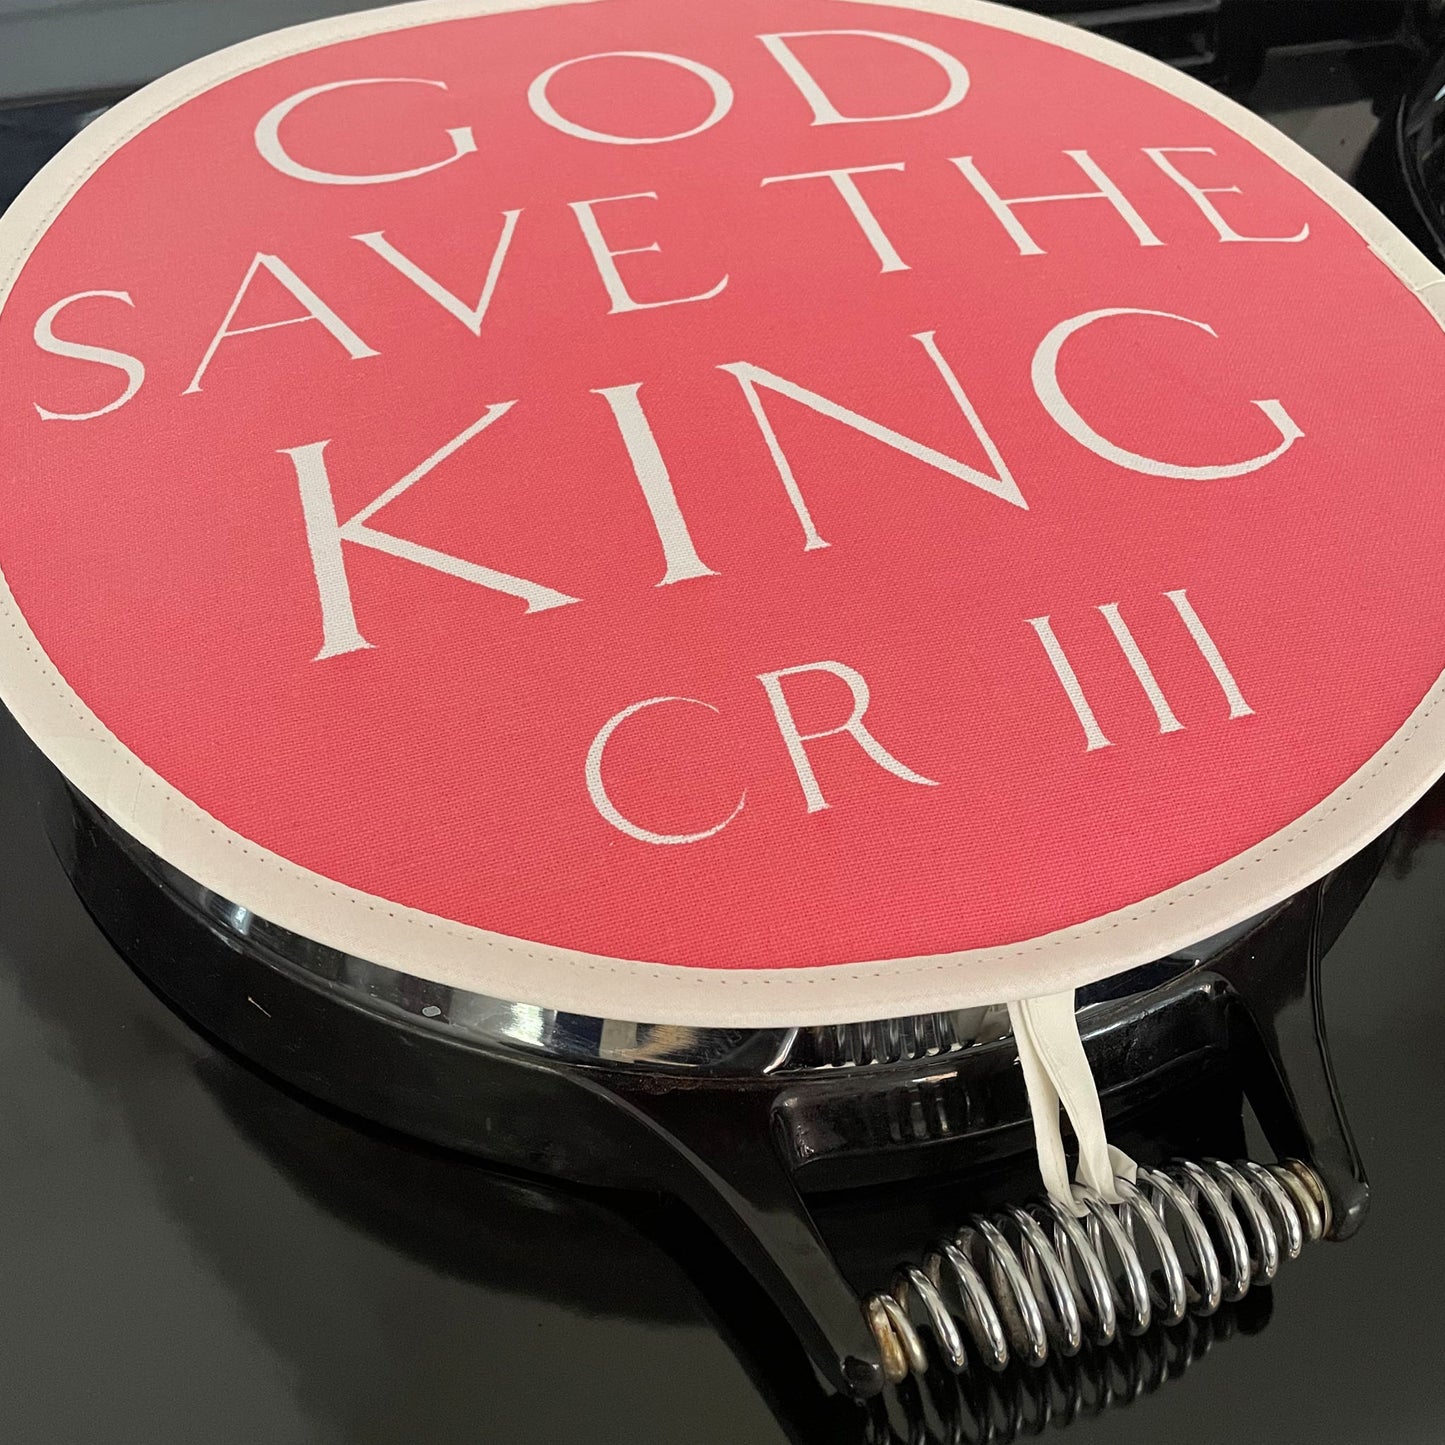 Crisp & Dene God Save the King Coronation Chefs Pad for use with Aga Range Cookers